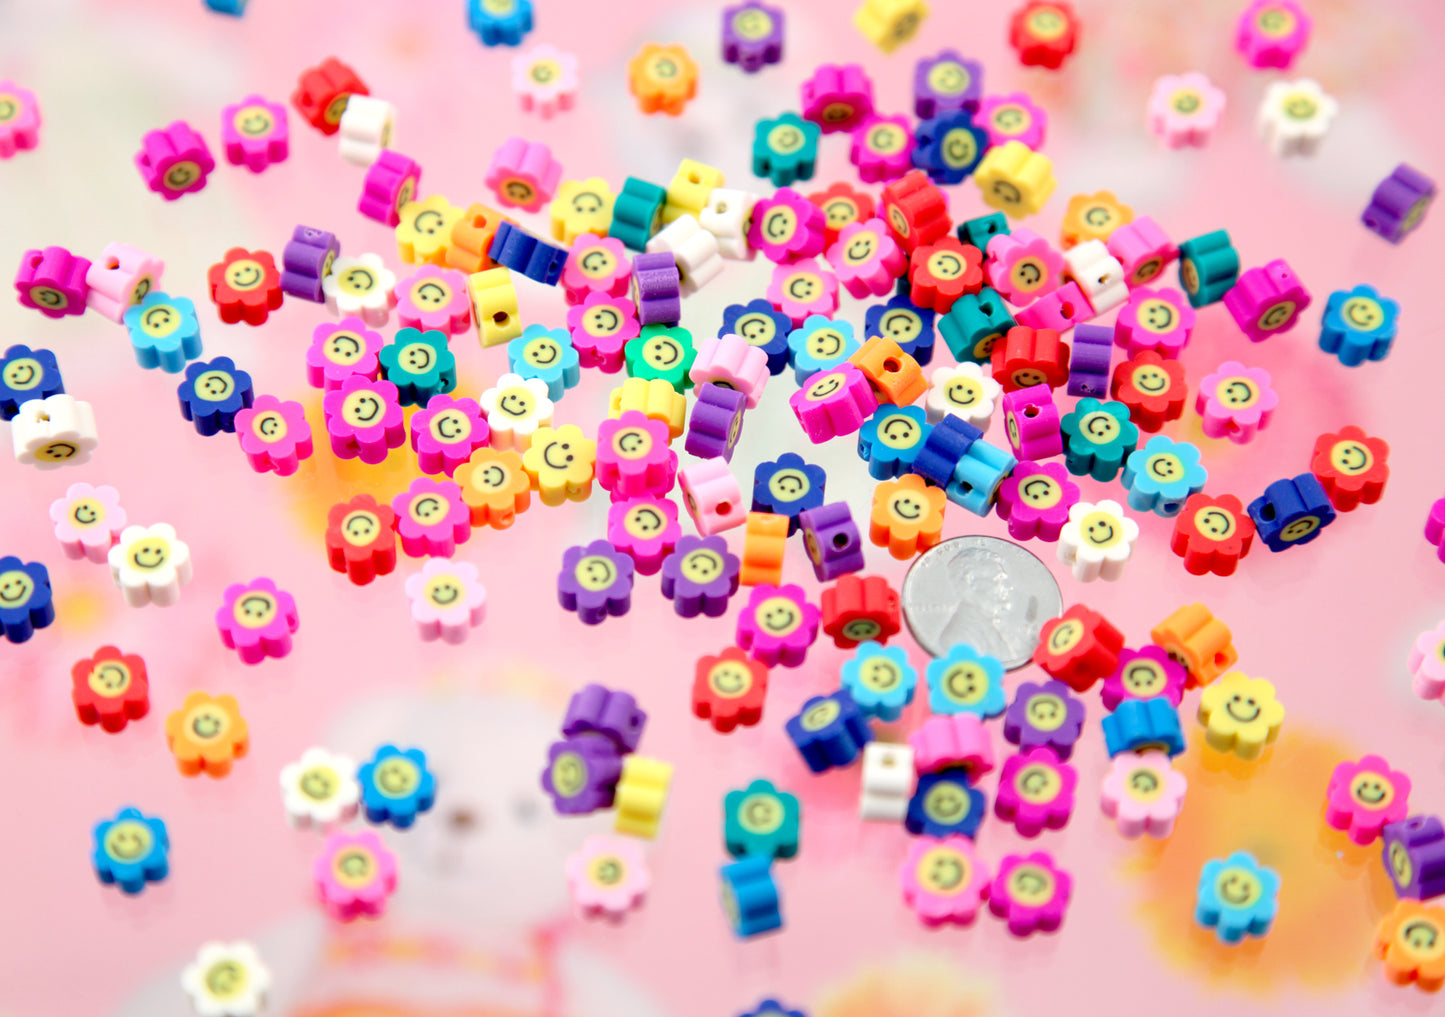 Happy Flower Beads - 9mm Happy Face Flower with Smile Shape Fimo or Polymer Clay Beads - 50 pc set